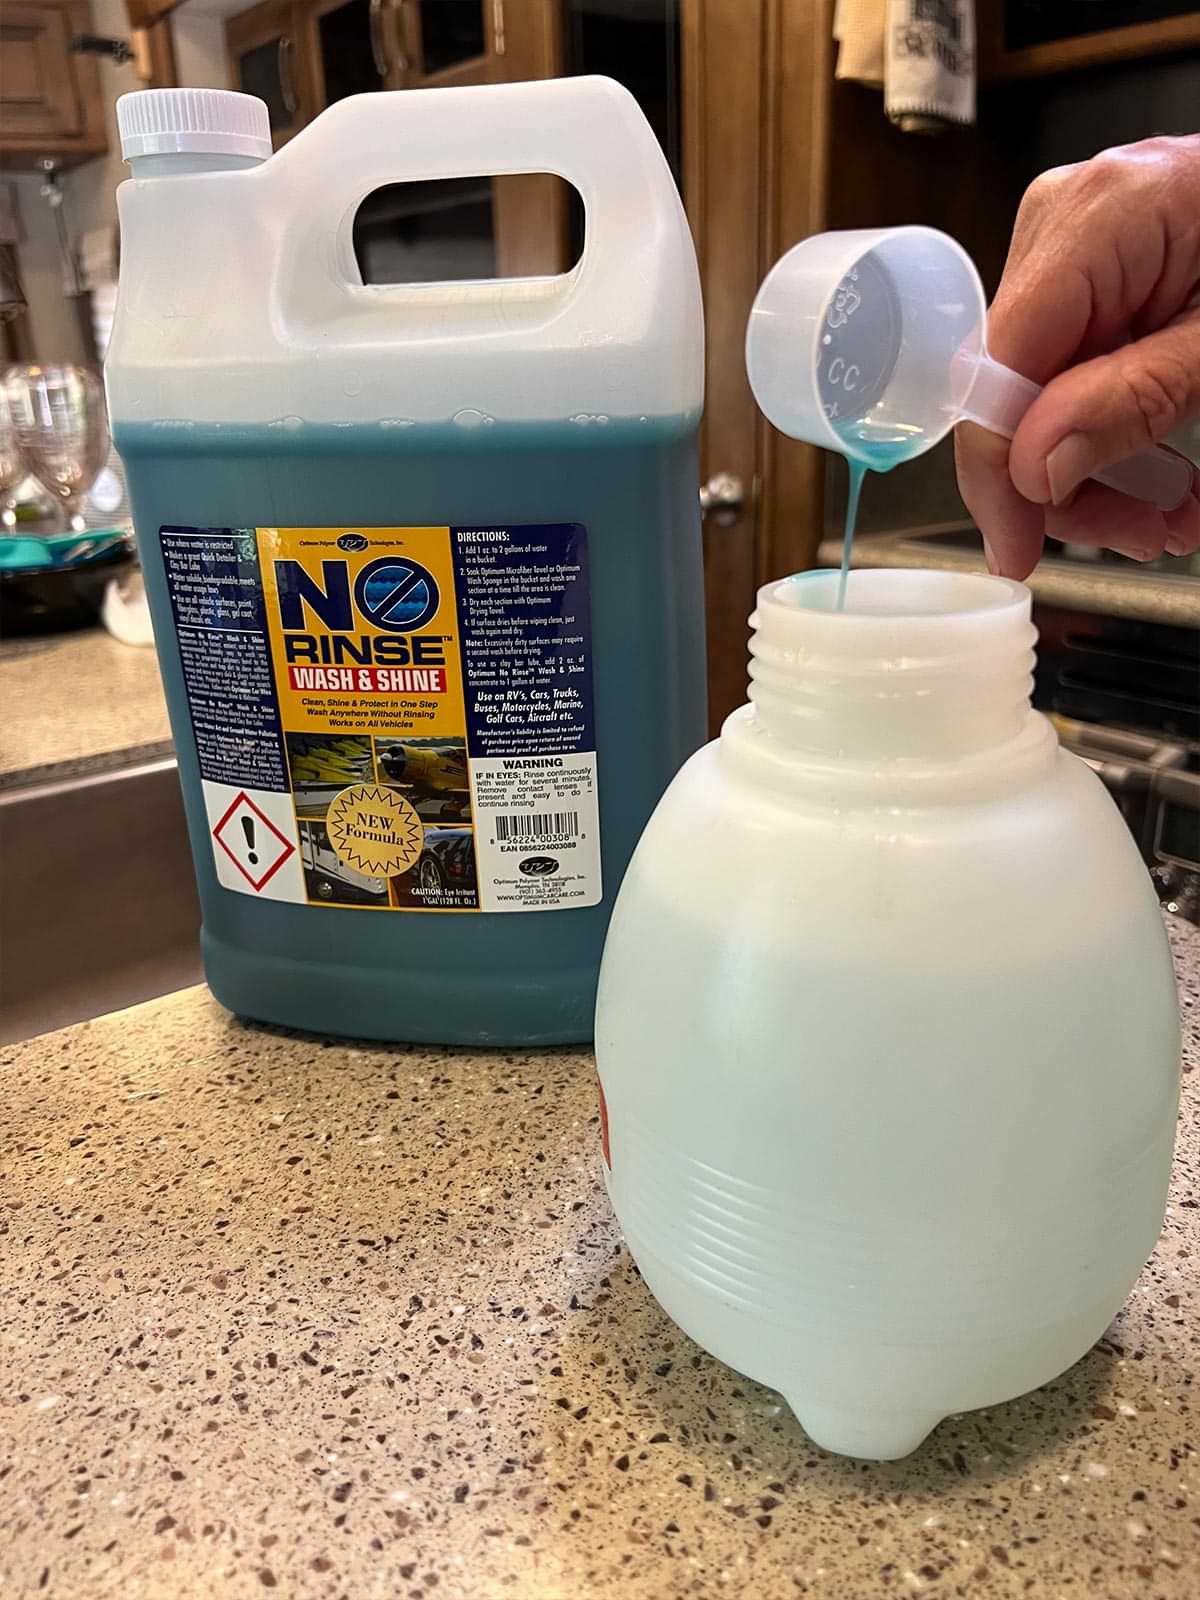 a bottle of No Rinse Wash & Shine sits on a counter as a measuring spoon is used to add the concentrate to the Solo canister